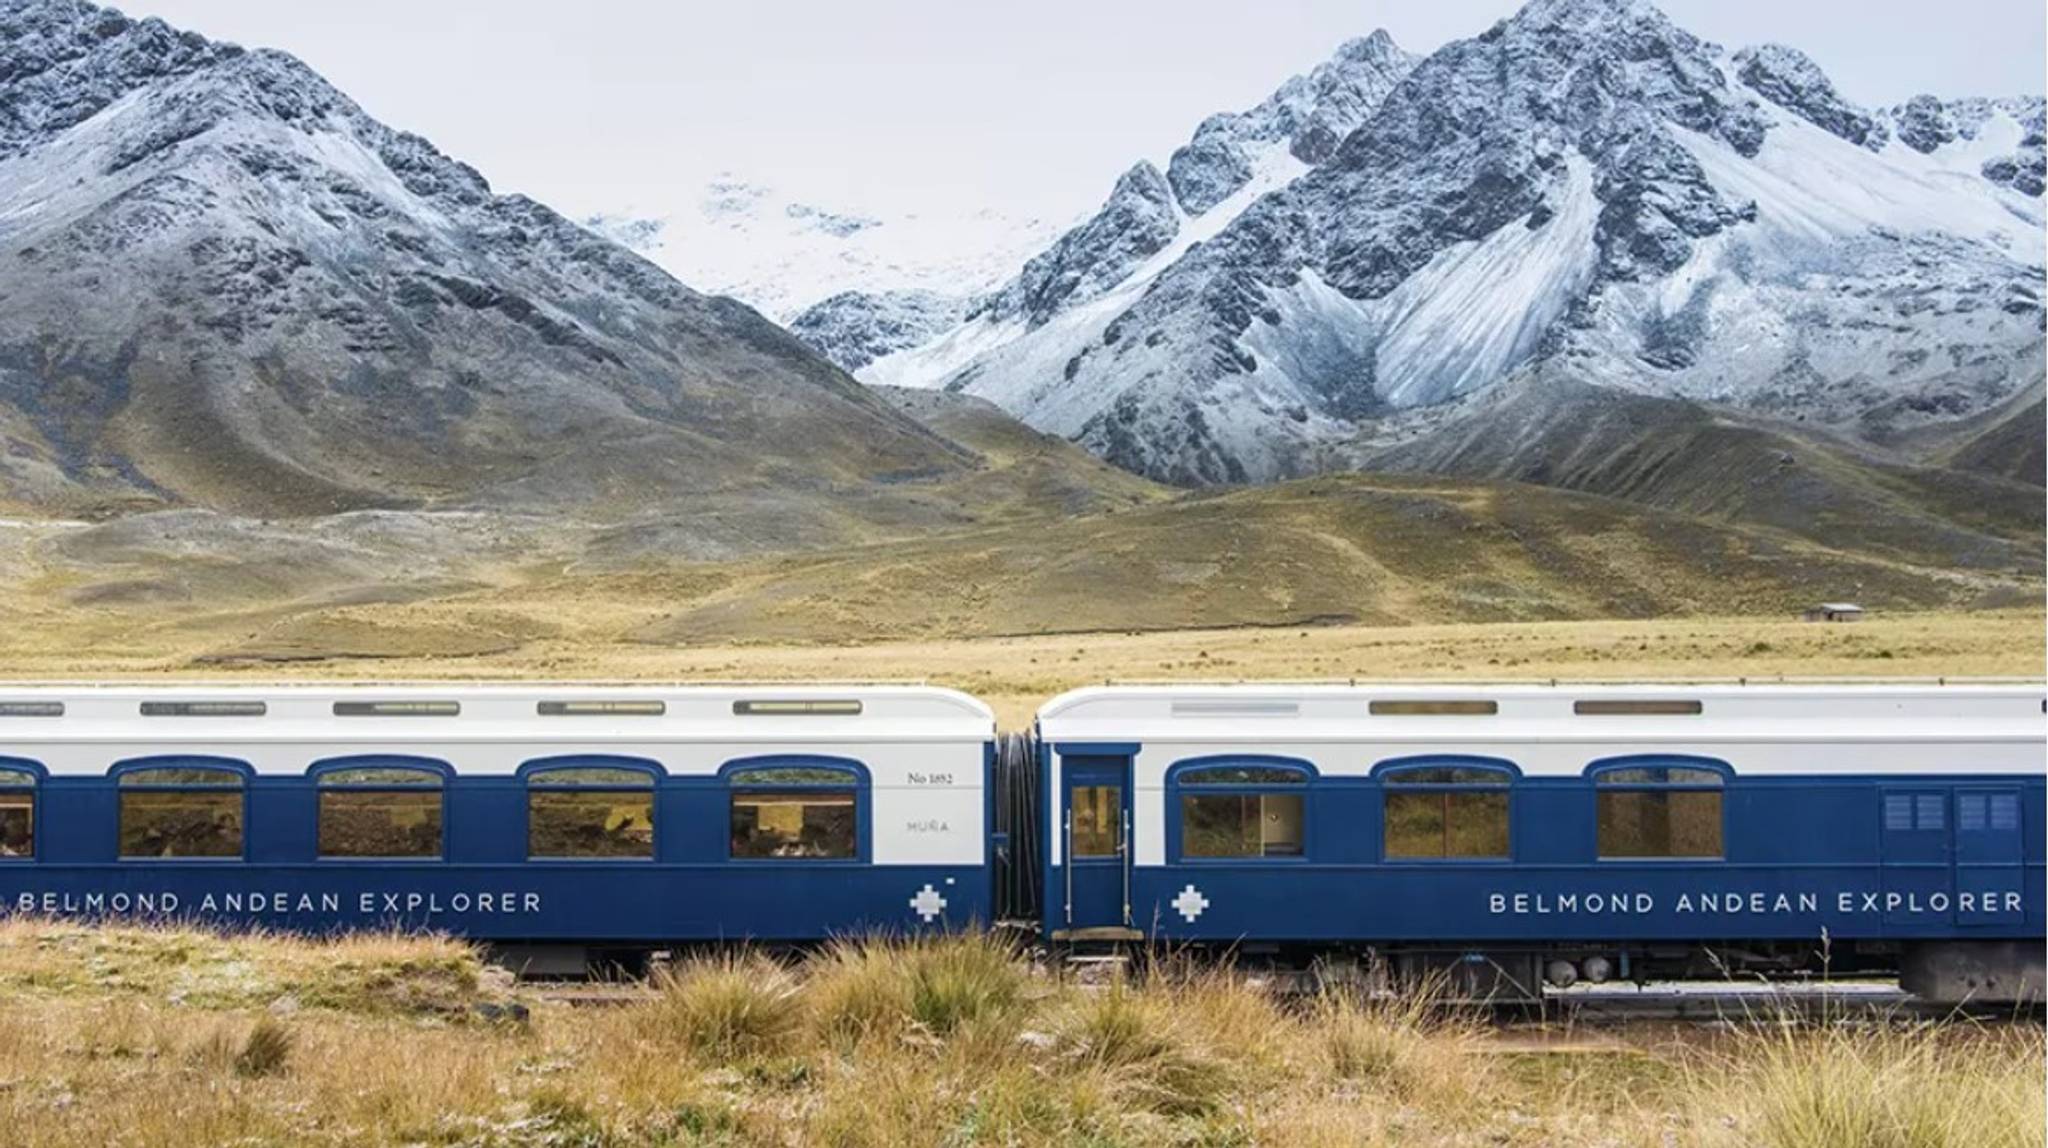 Veuve Clicquot and Belmond cater to luxury eco-travel